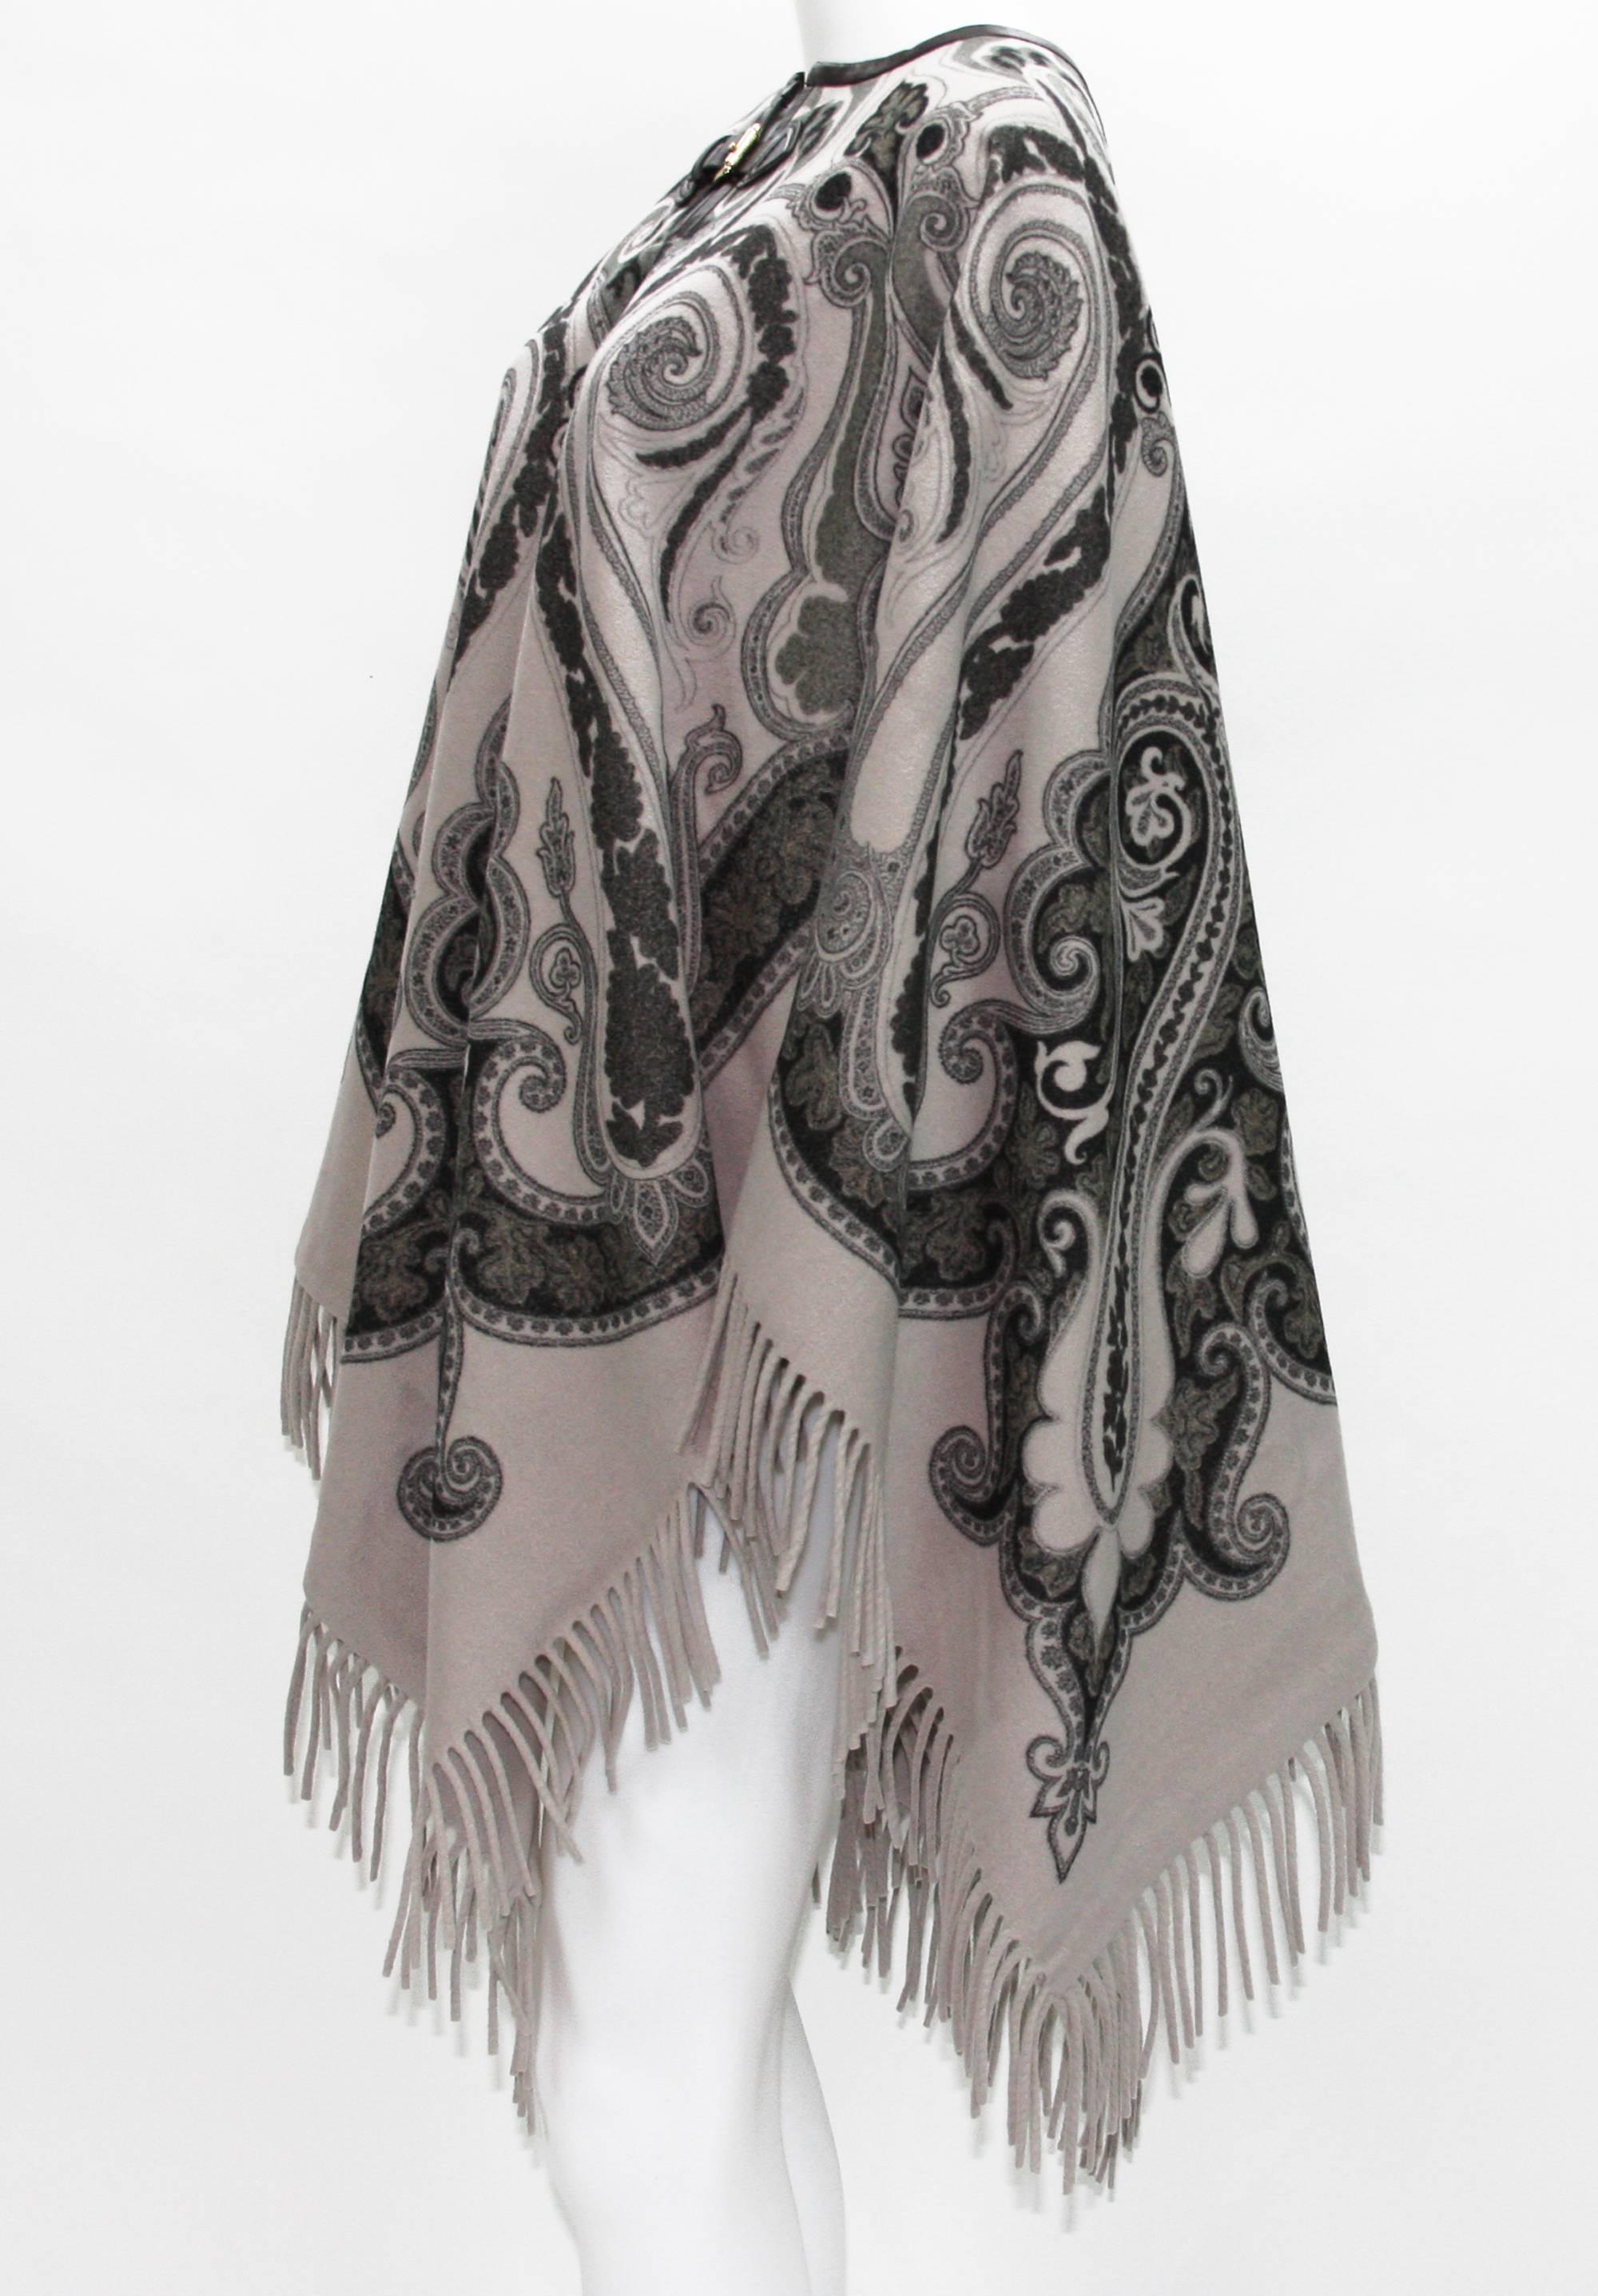 Women's New Etro Wool Poncho Cape with Leather Trim